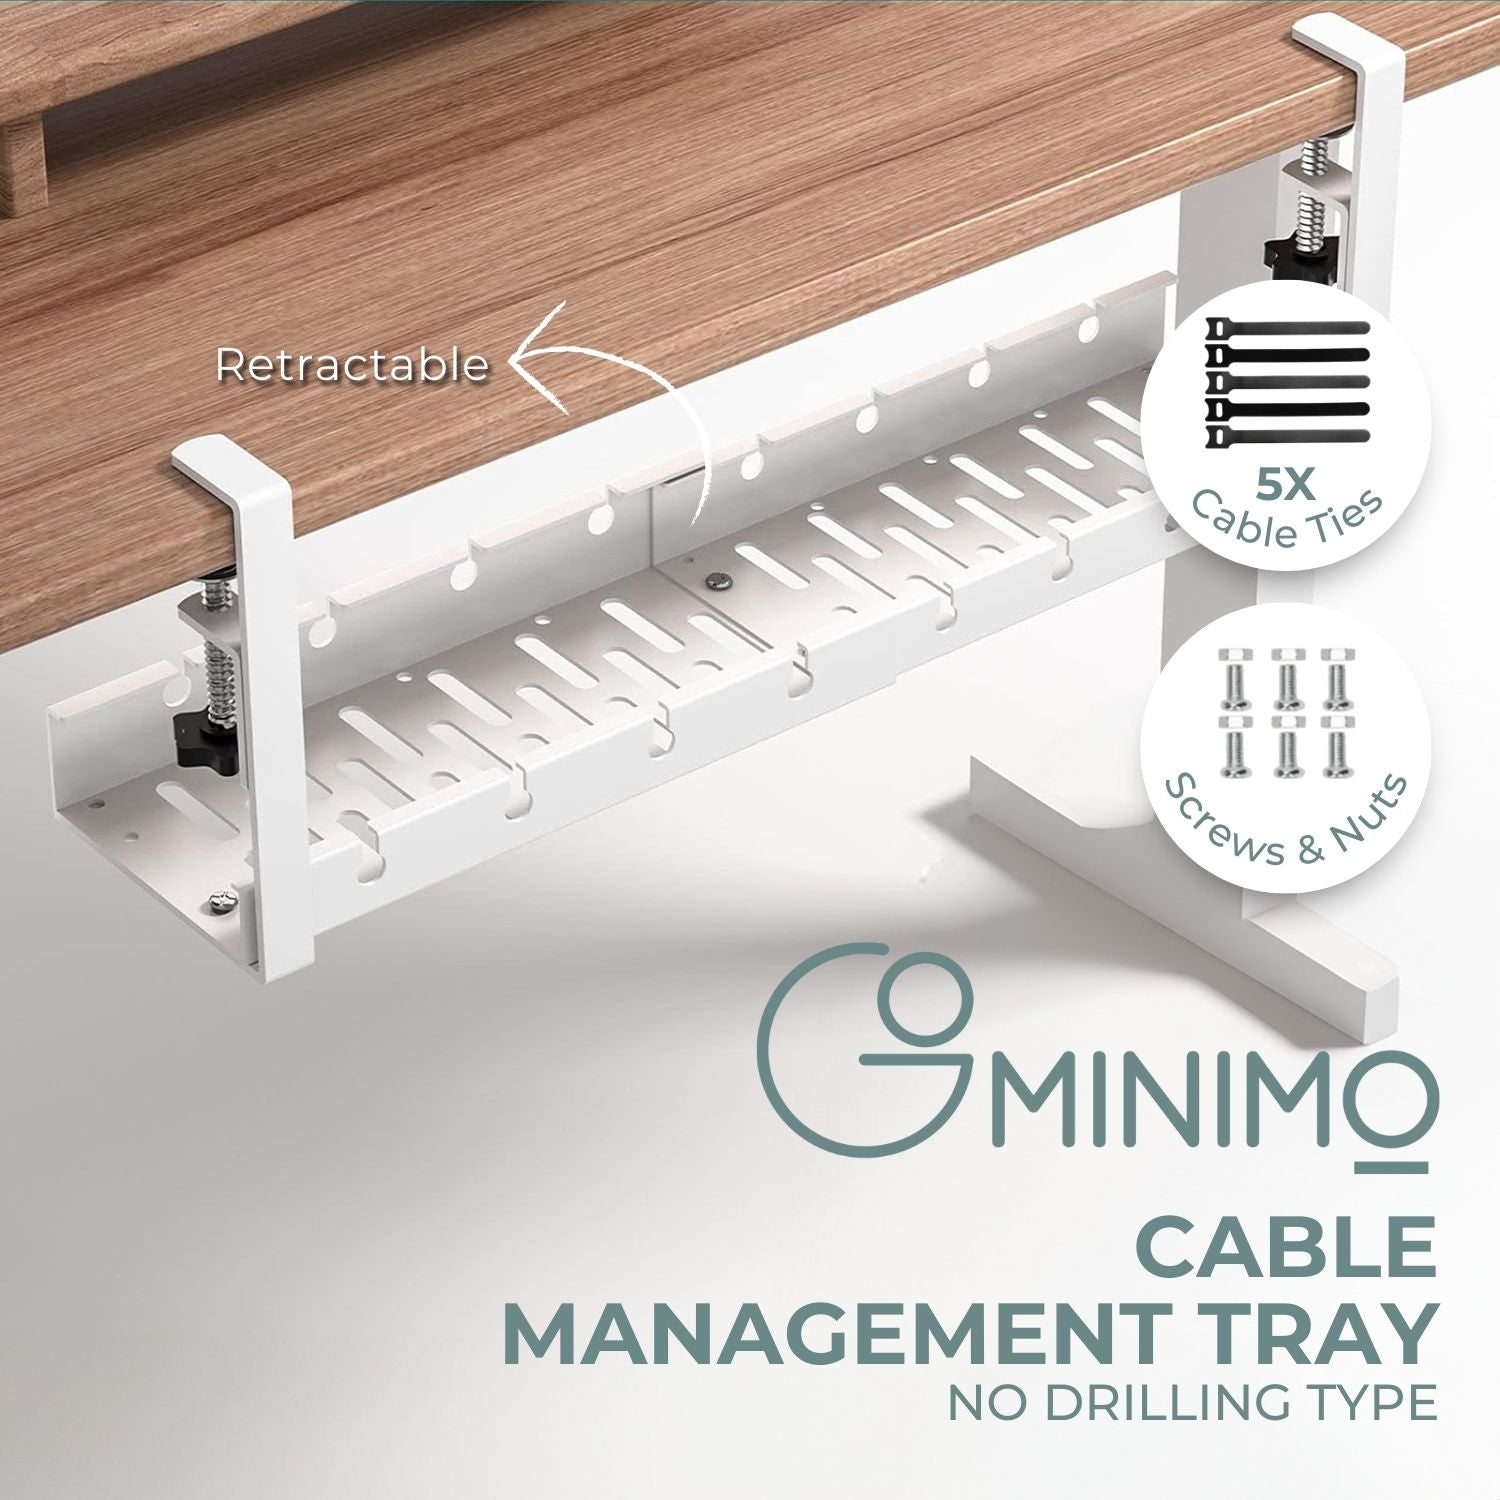 GOMINIMO Retractable Cable Management Tray- No Drilling Type (White)